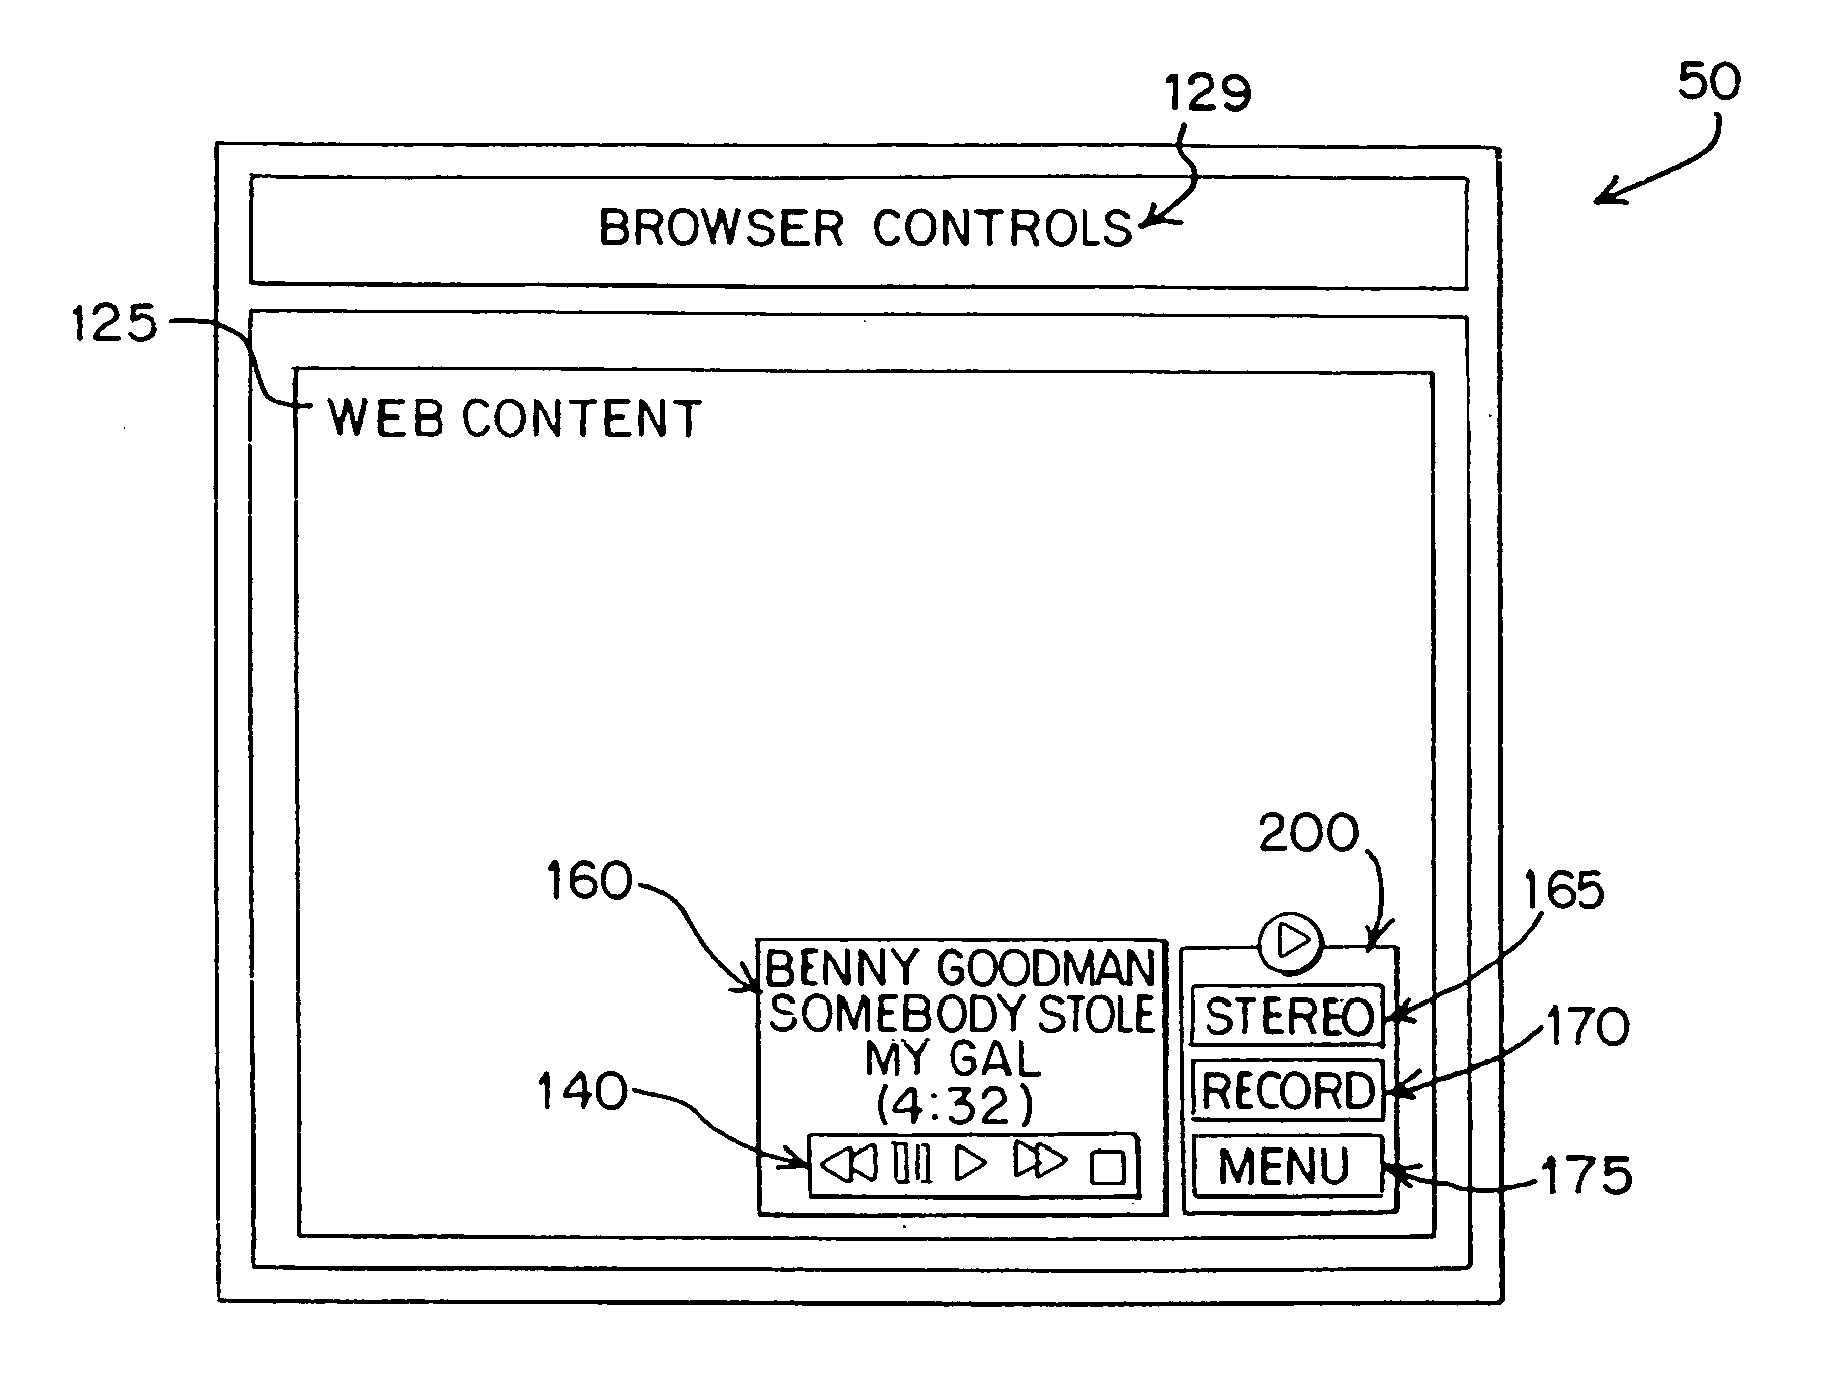 System and method for using an application on a mobile device to transfer internet media content